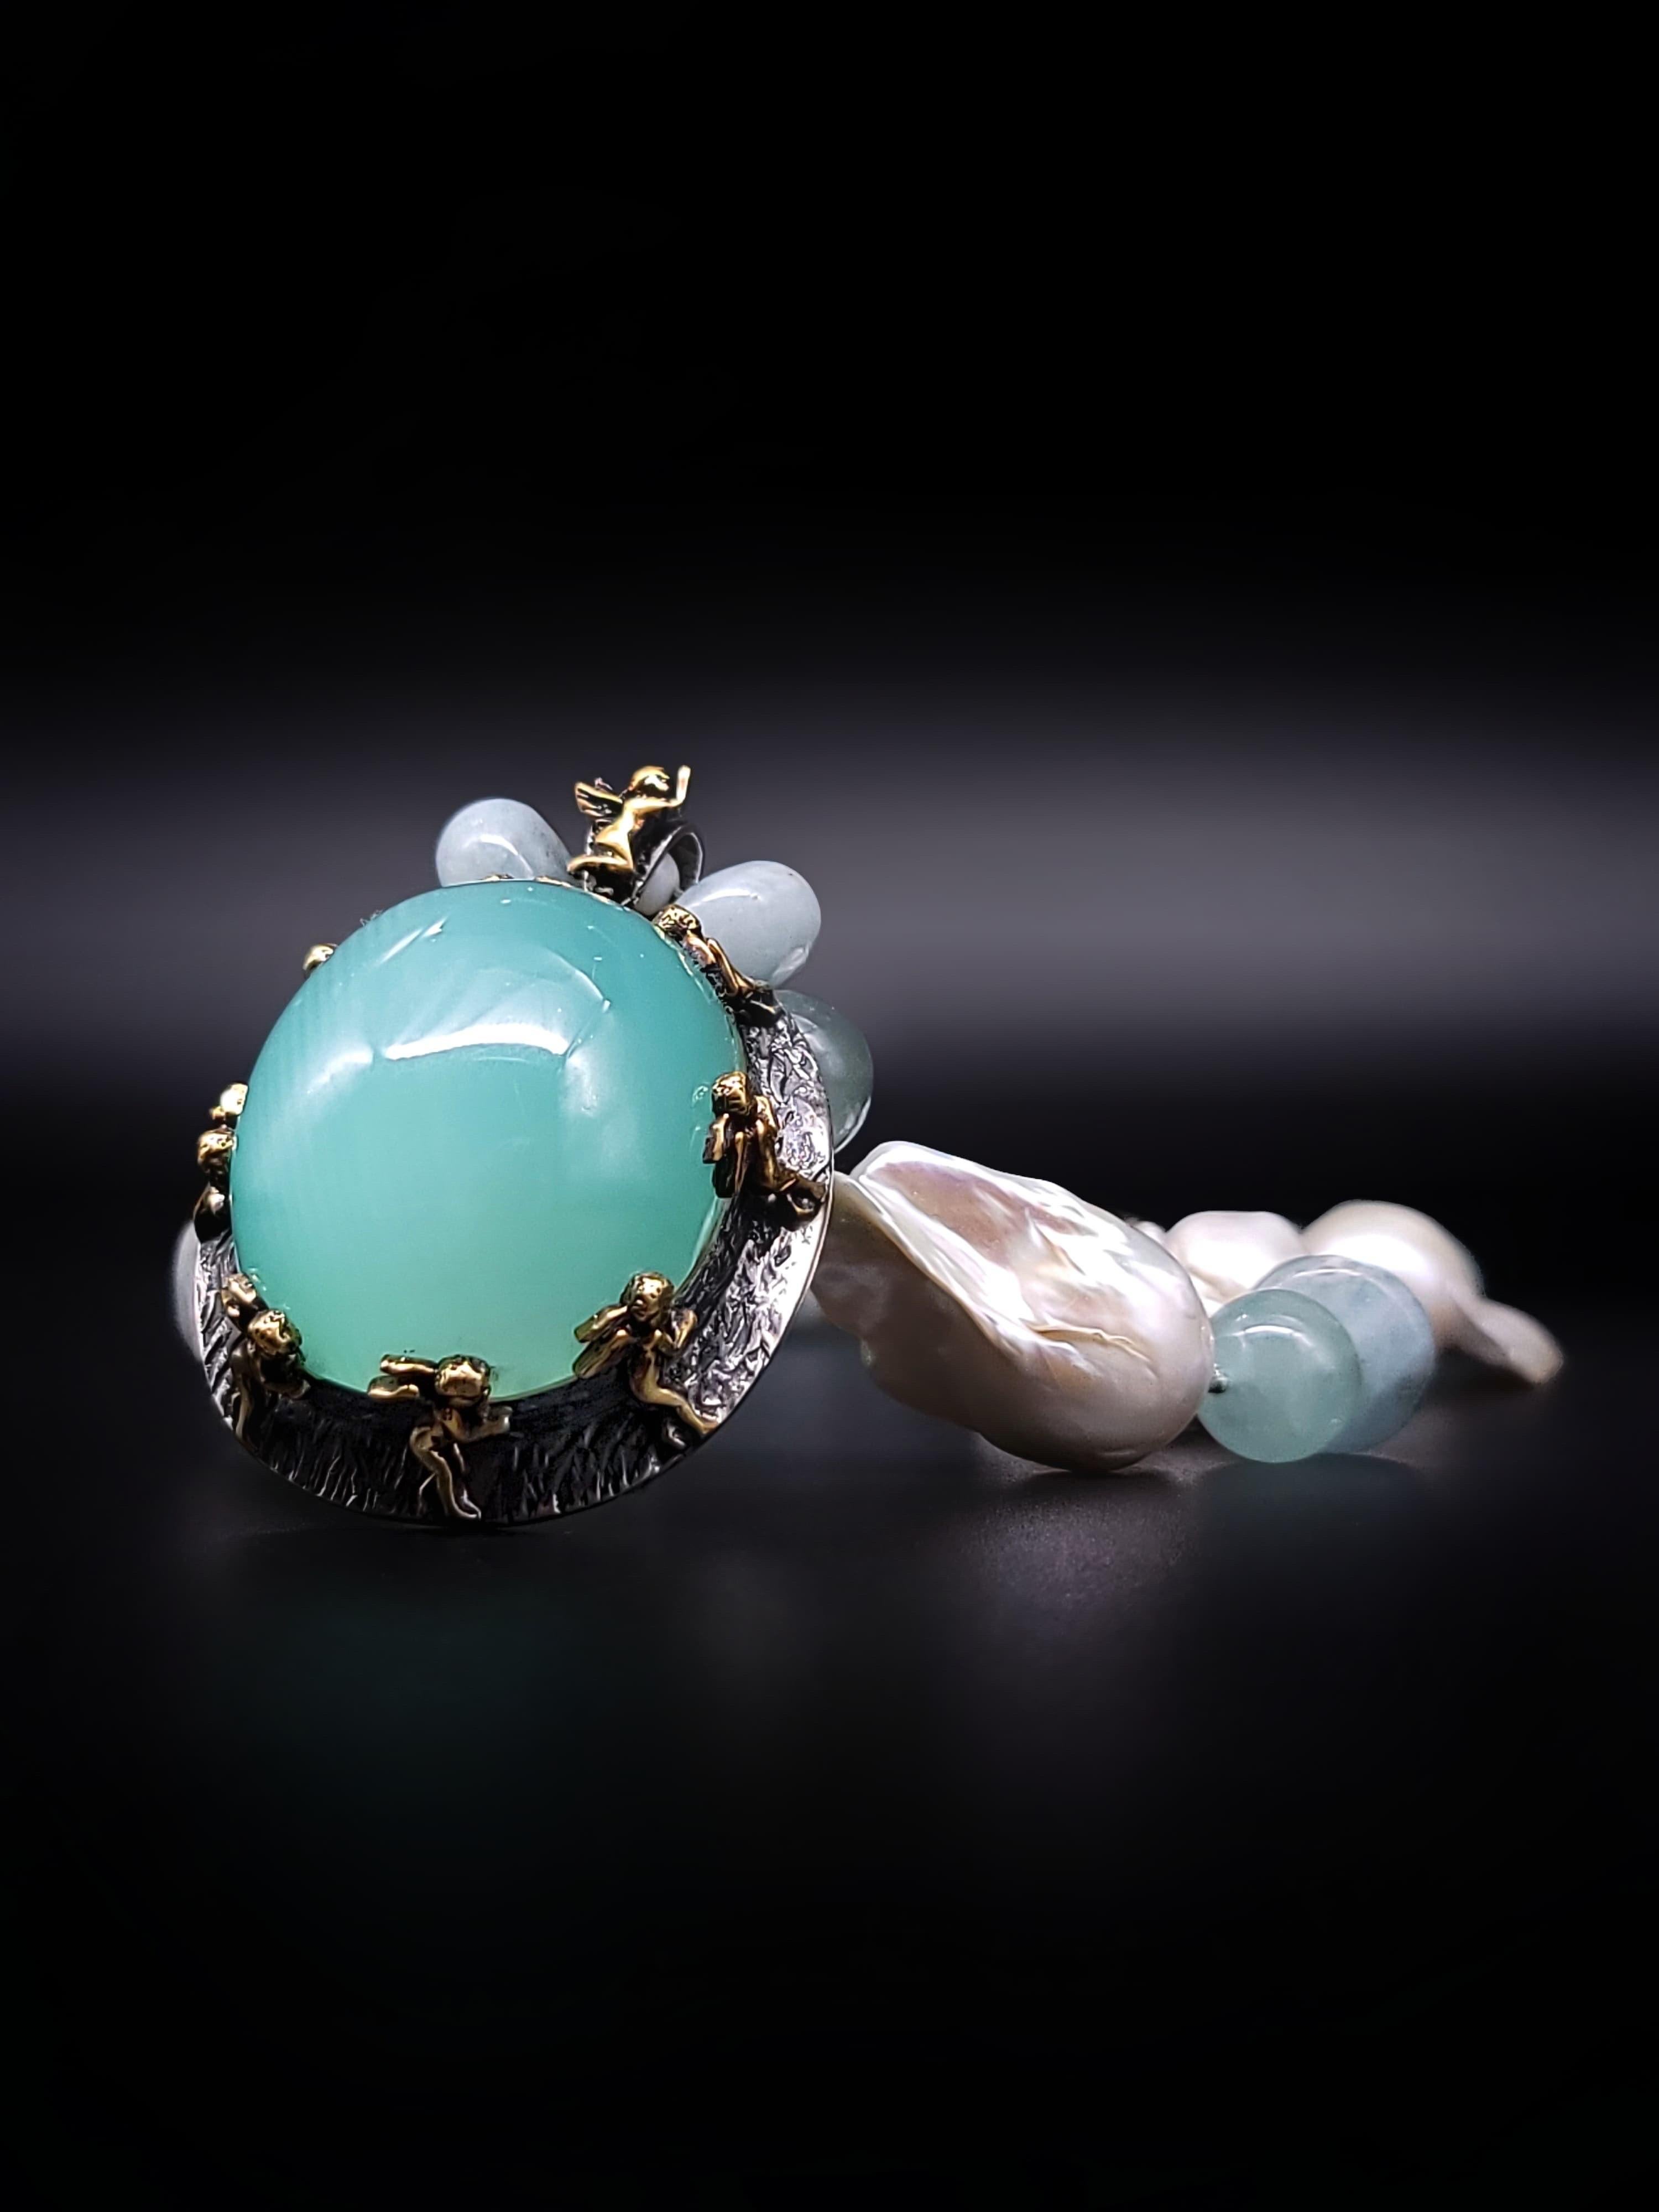 A.Jeschel Massive Aquamarine Pendant suspended from Baroque Pearl Necklace For Sale 7